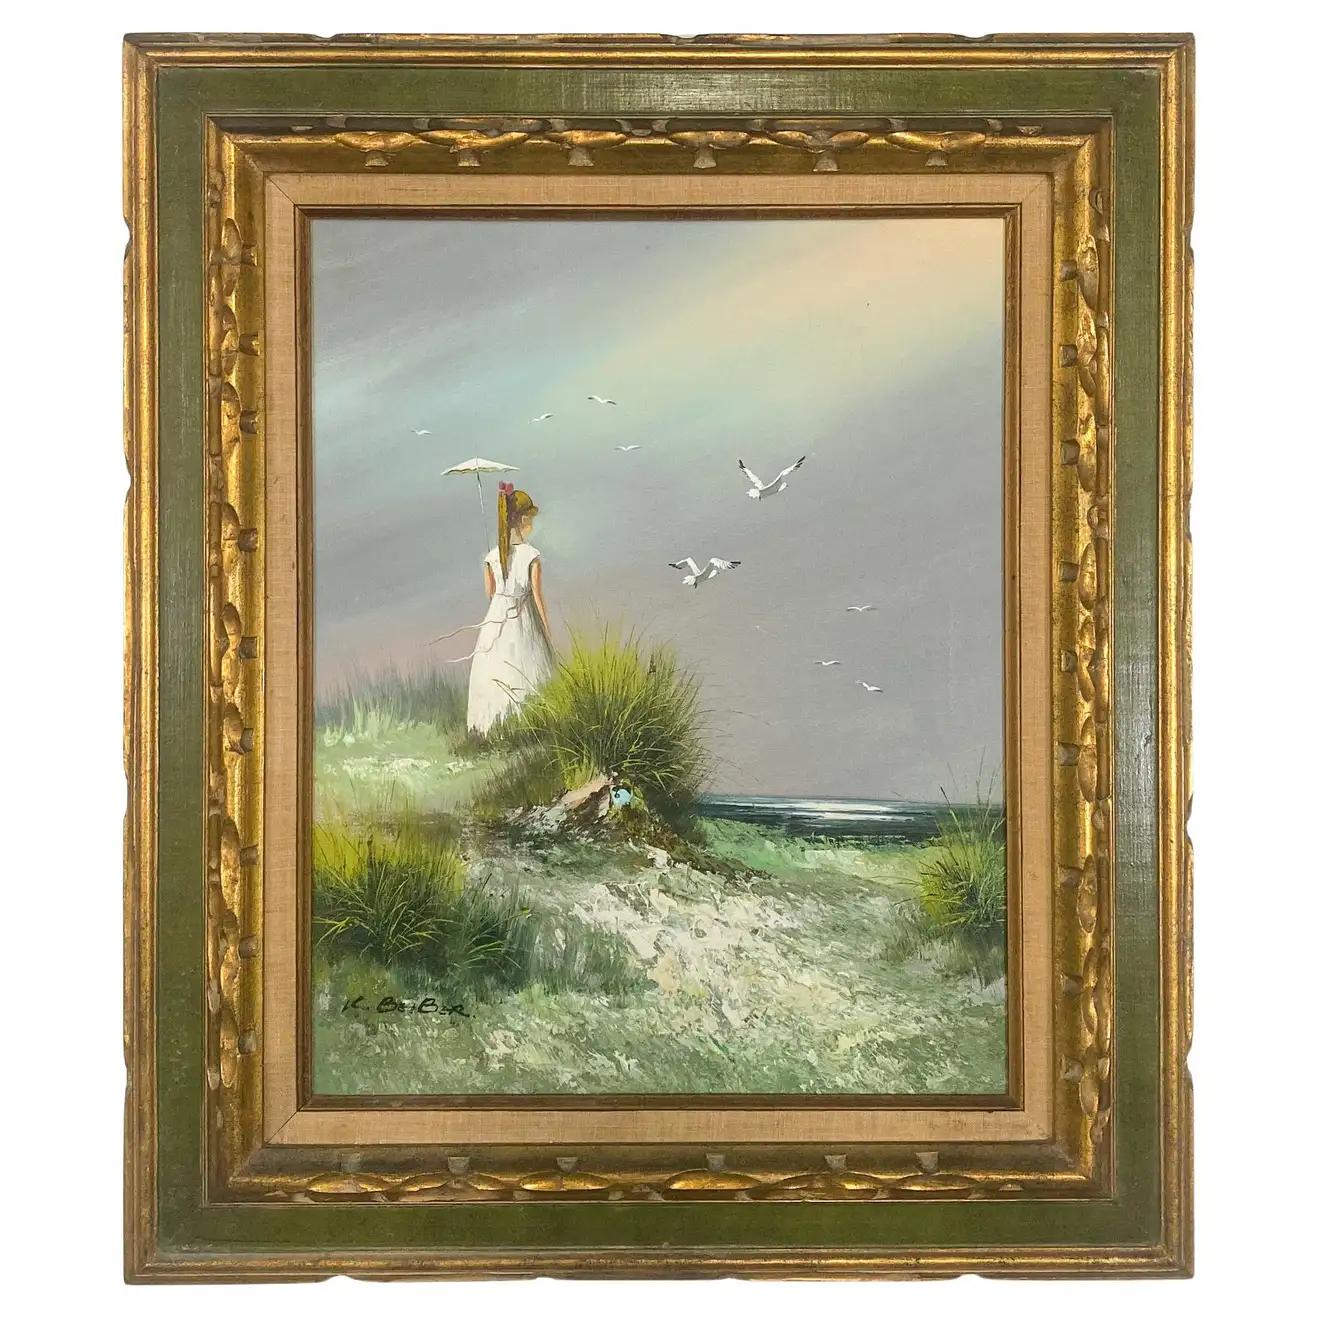 Unknown Landscape Painting - Impressionistic Seascape Oil on Canvas Painting of a Lady and Seagulls